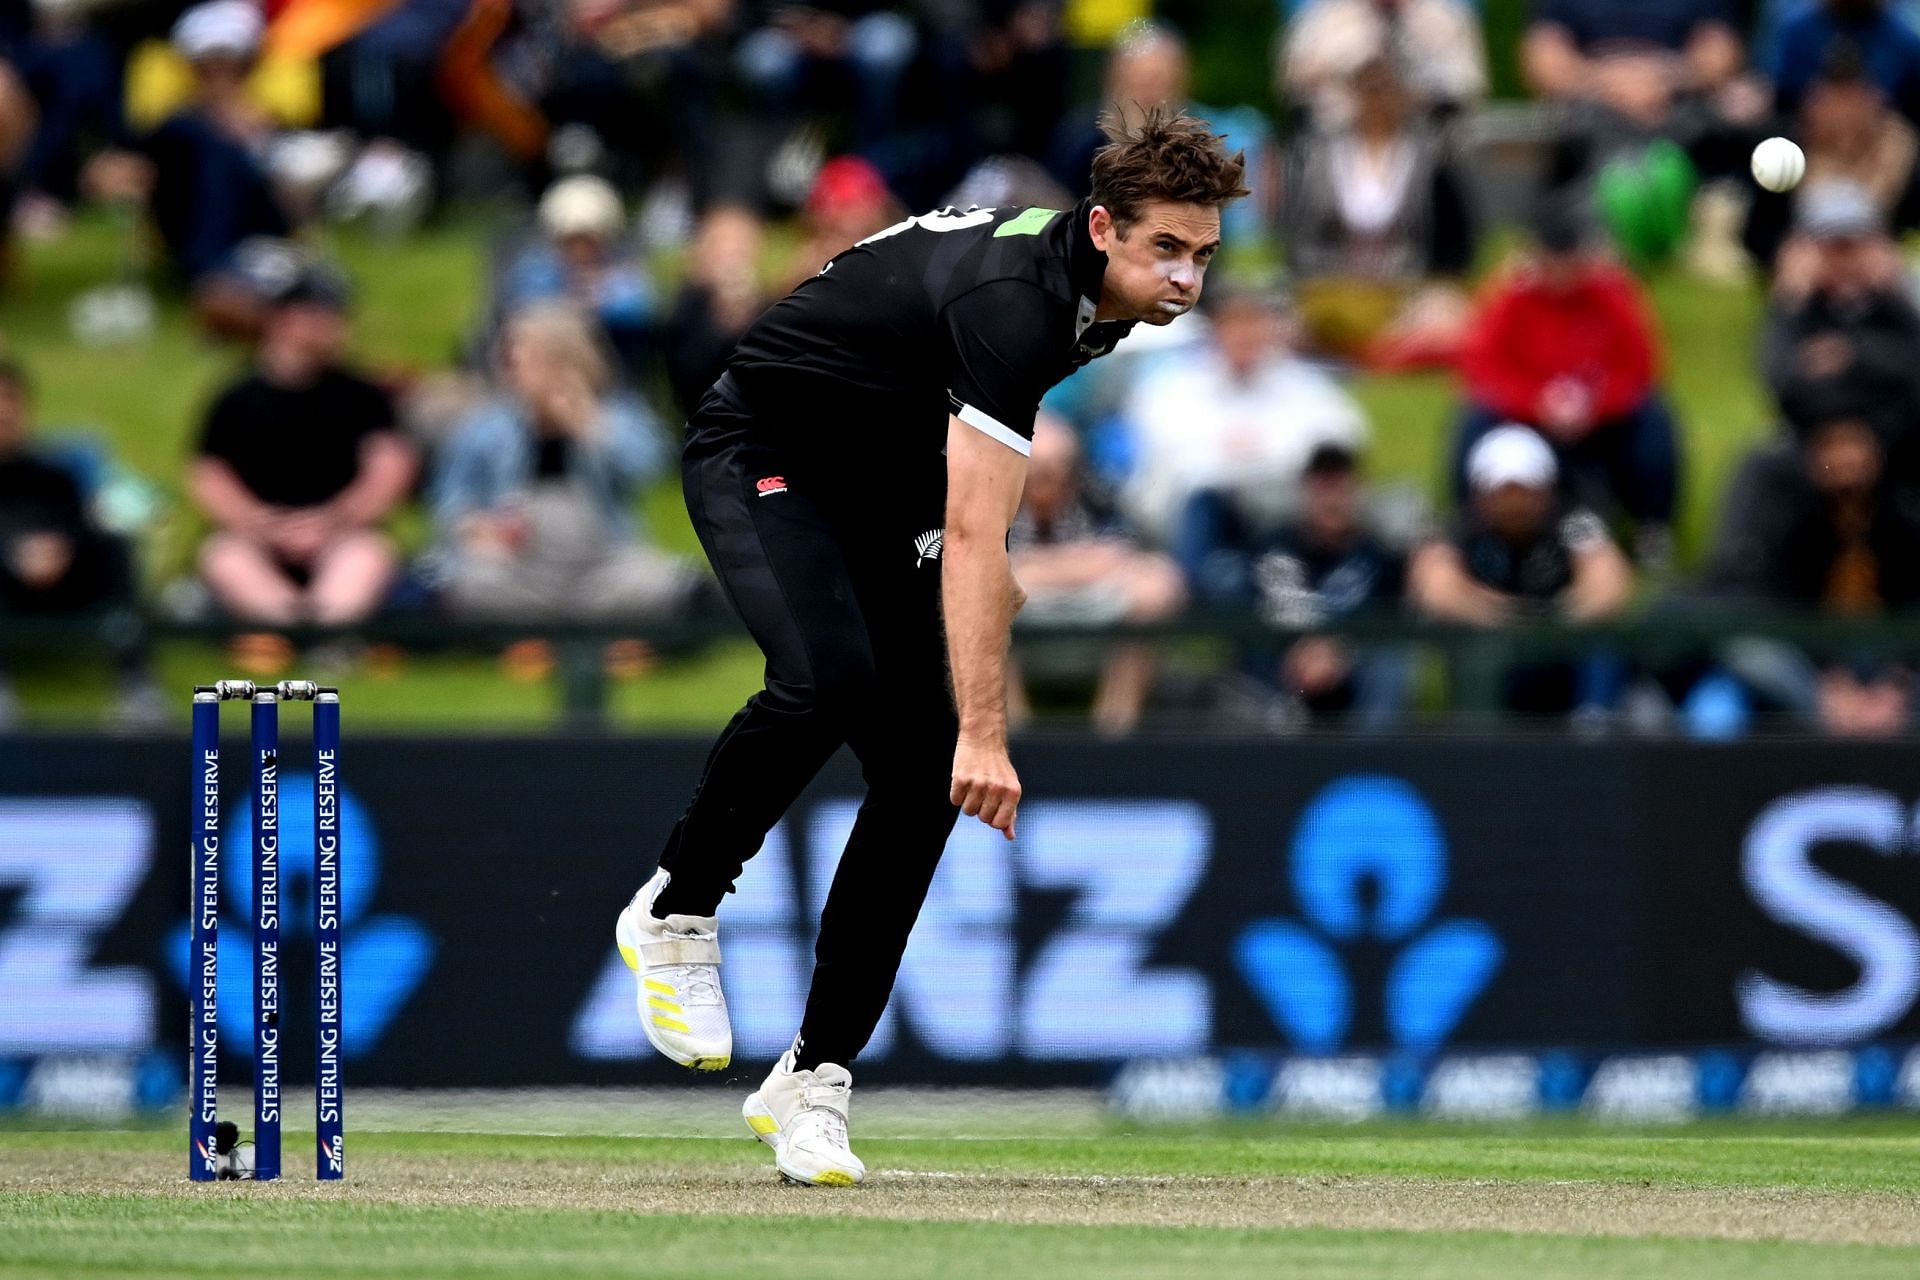 Tim Southee bowls during the New Zealand v India - 3rd ODI.